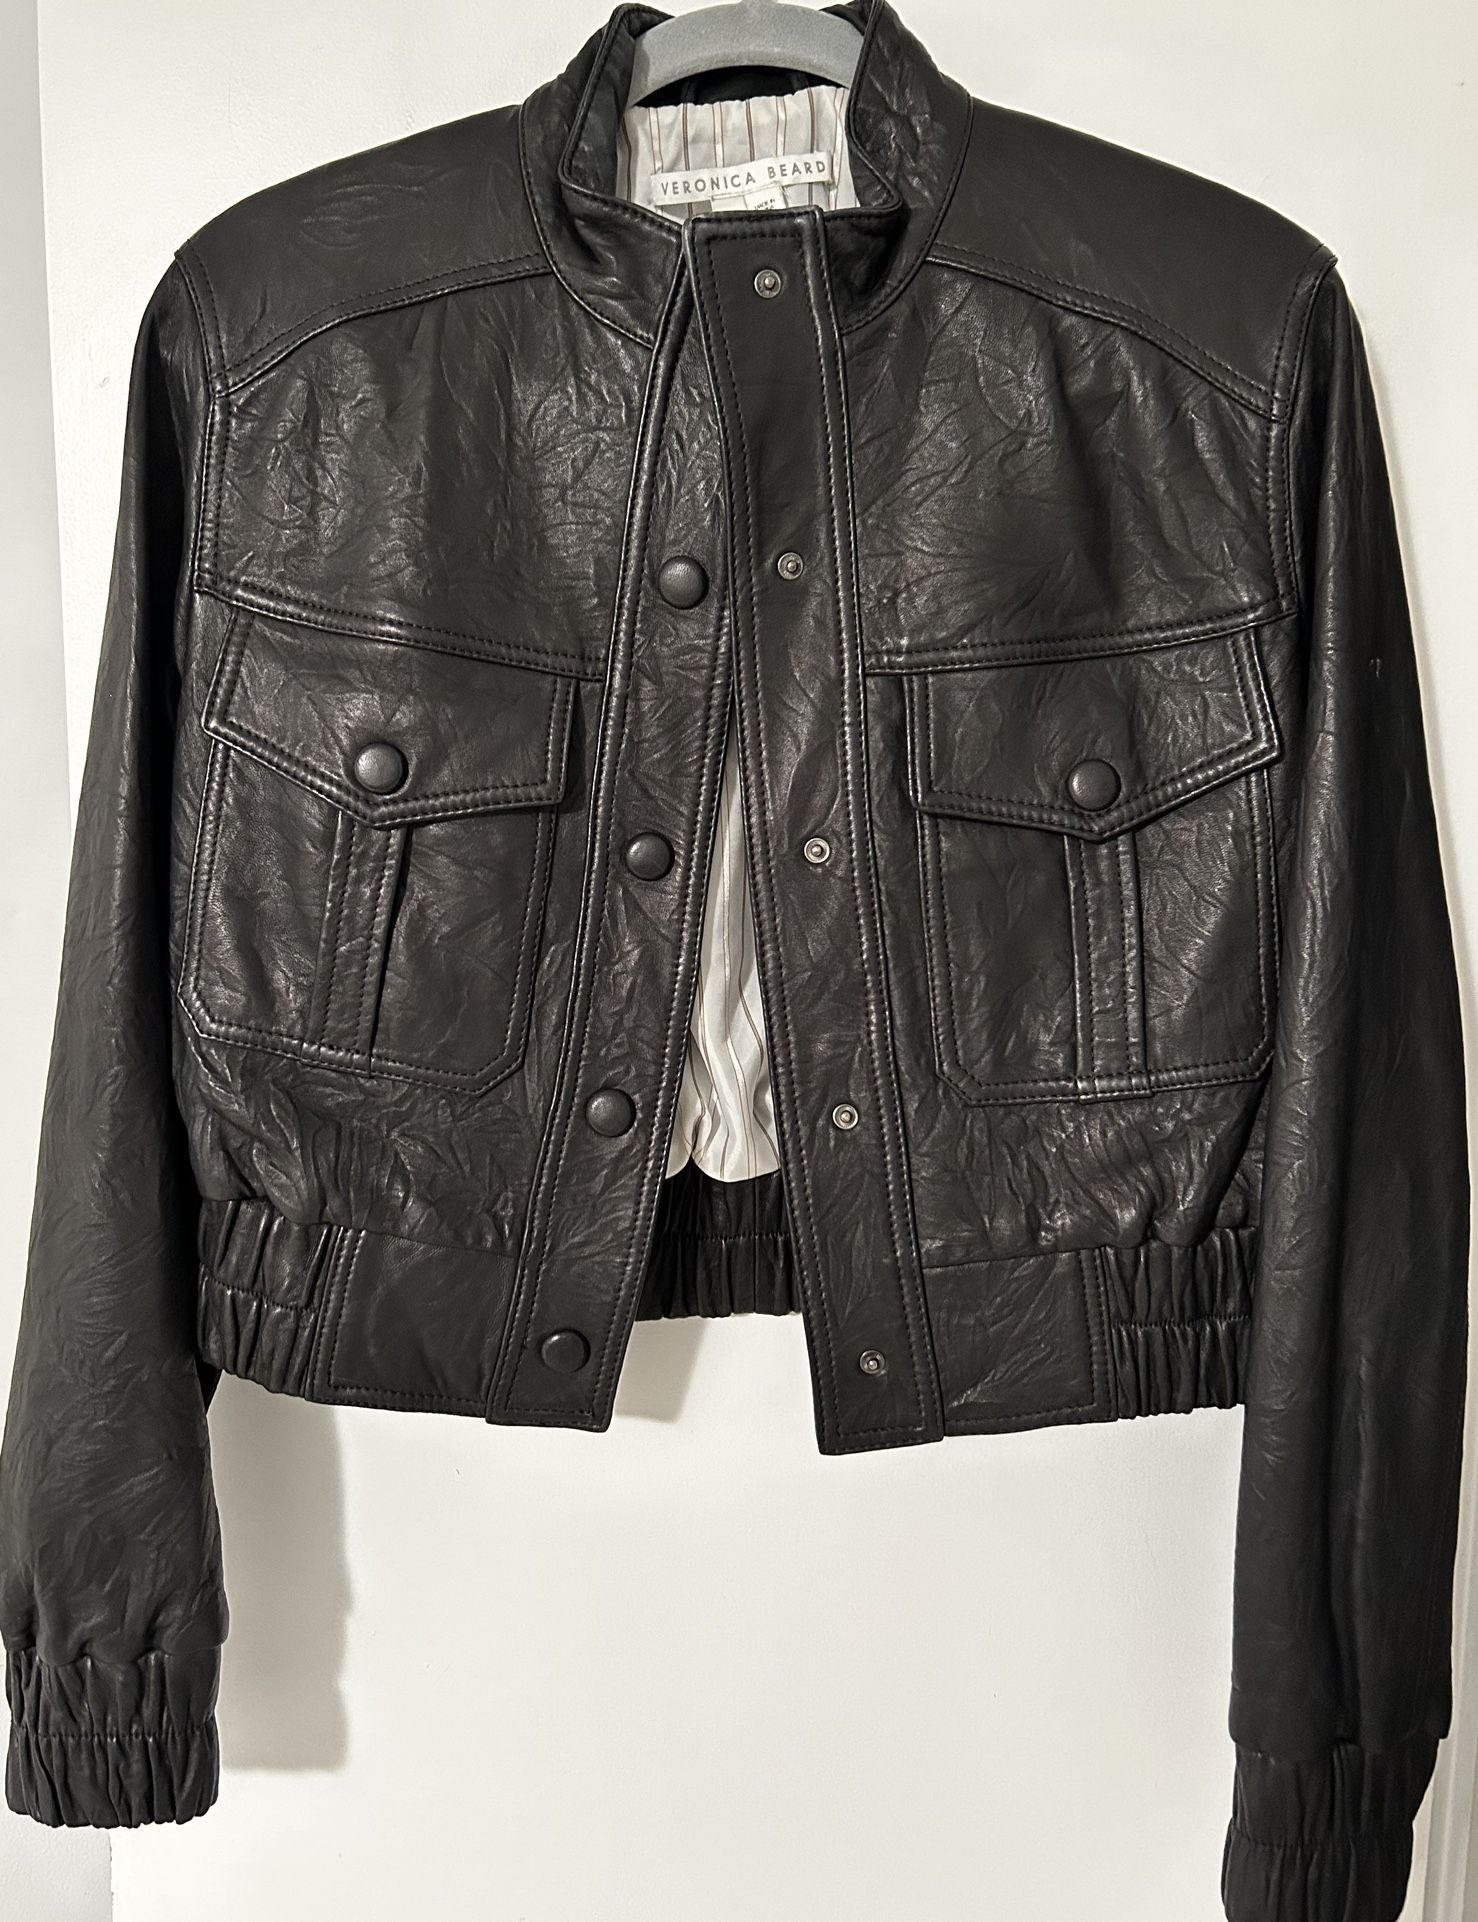 Veronica Beard 100% Buttery Soft Leather Jacket Worn Once! 